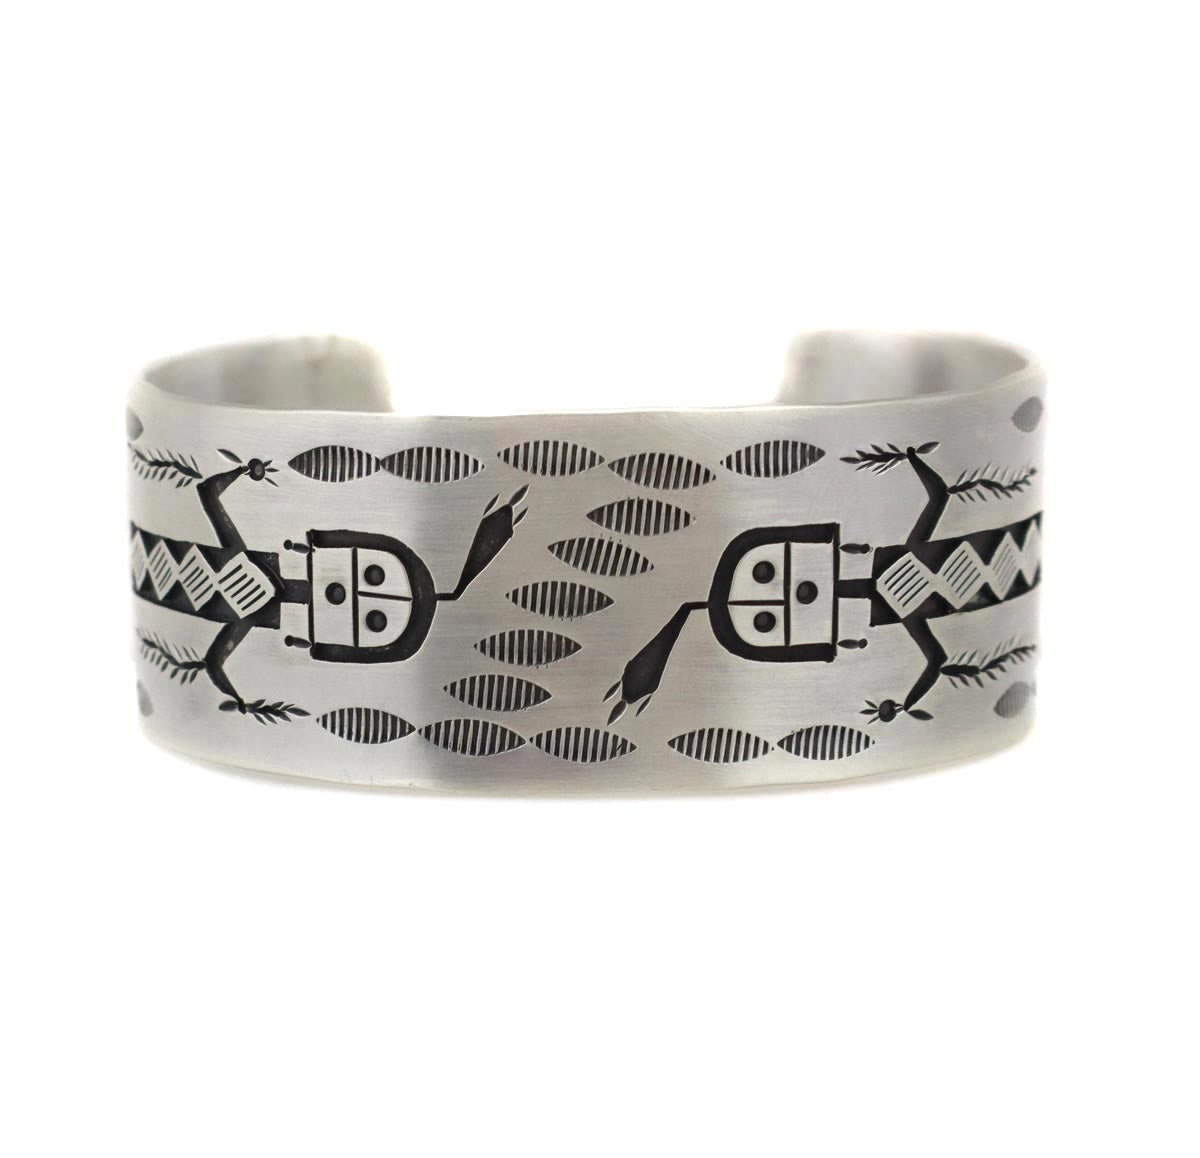 Roland Begay - Contemporary Navajo Sterling Silver Overlay Bracelet with Yei Design, size 7 (J14755) 